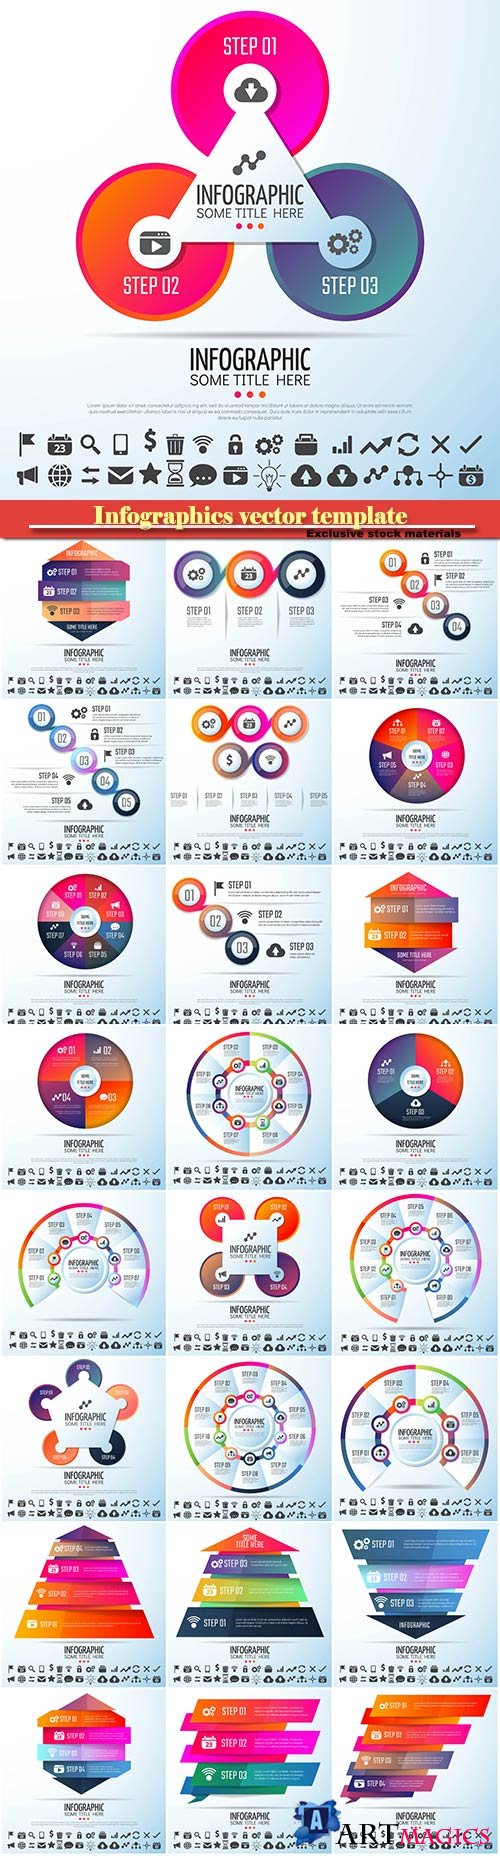 Infographics vector template for business presentations or information banner # 5